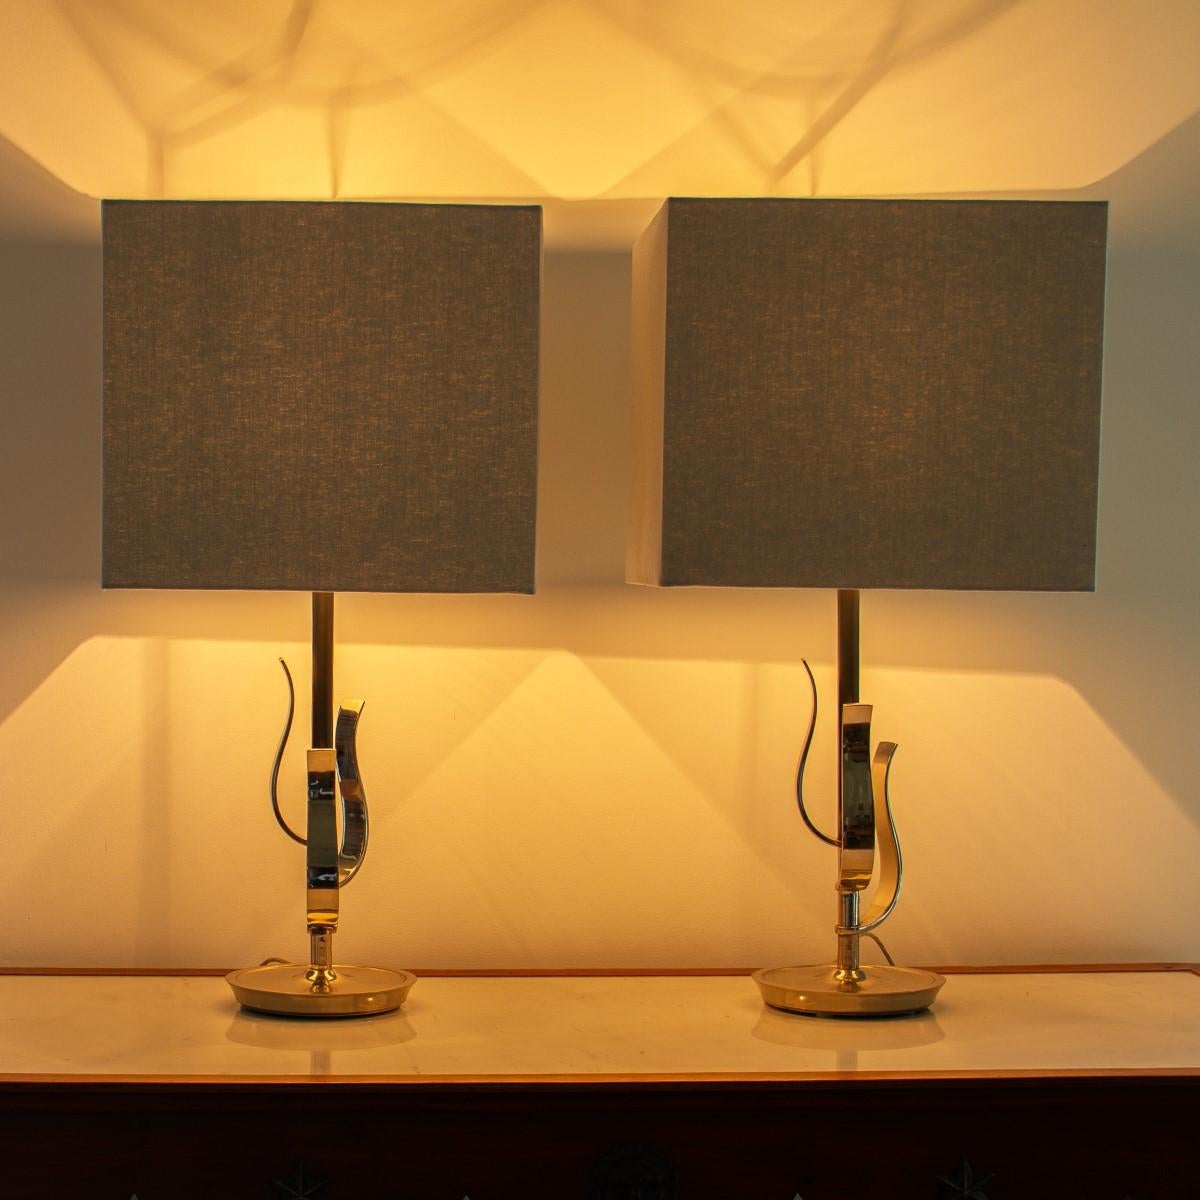 A pair of lamps with ebonized stem and polished metal trident design, set on a circular polished metal base, 1950s

These lamps were designed by The Rembrandt Light Company who started operations in Baltimore, Maryland in 1816 with high quality